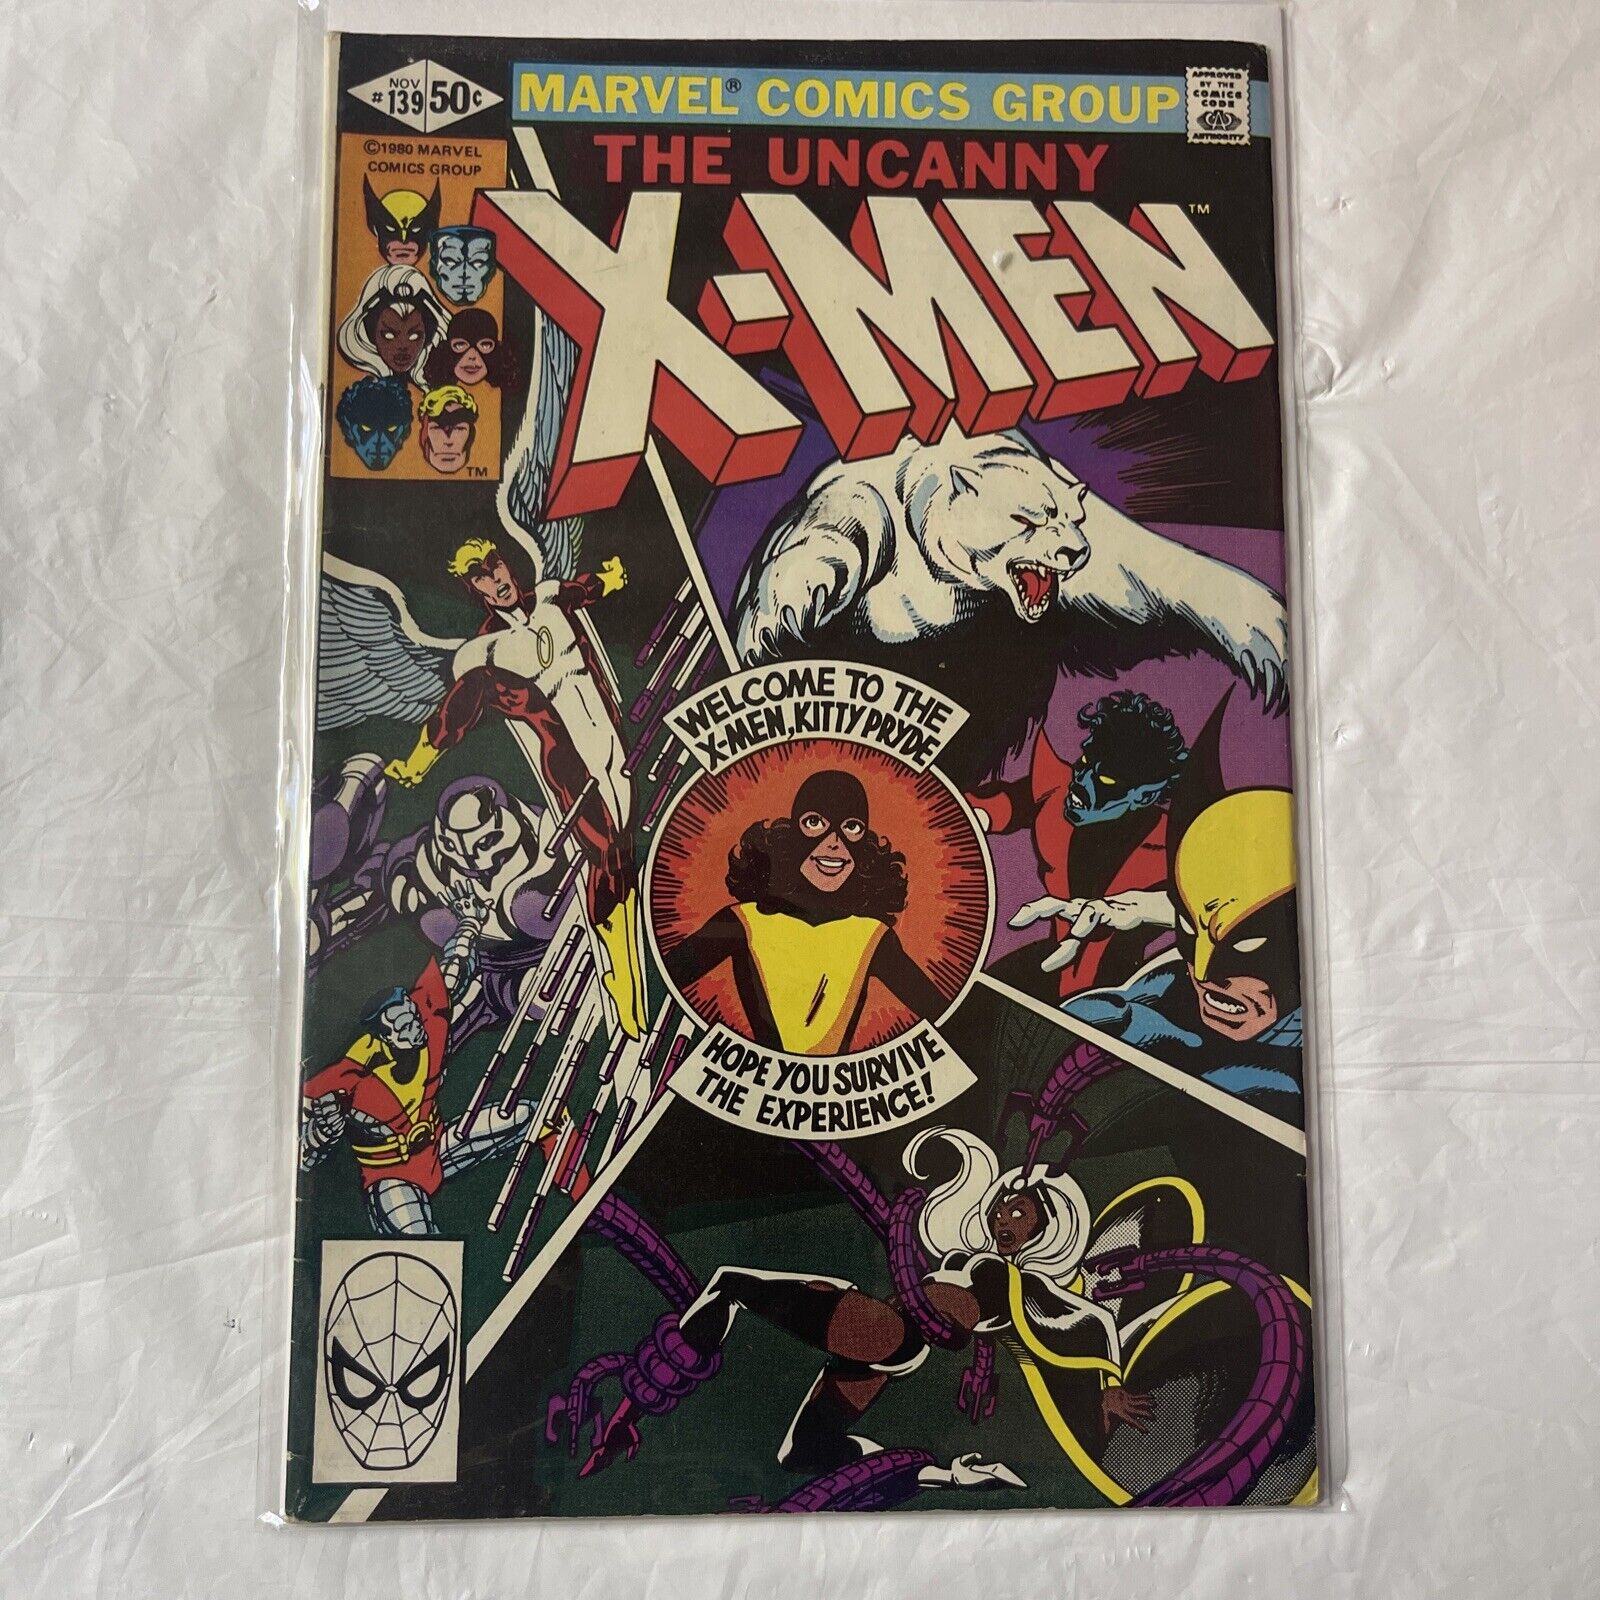 X-Men (1980 series) #139 in Very Fine + condition. Welcome To X-Men,Kitty PRYDE